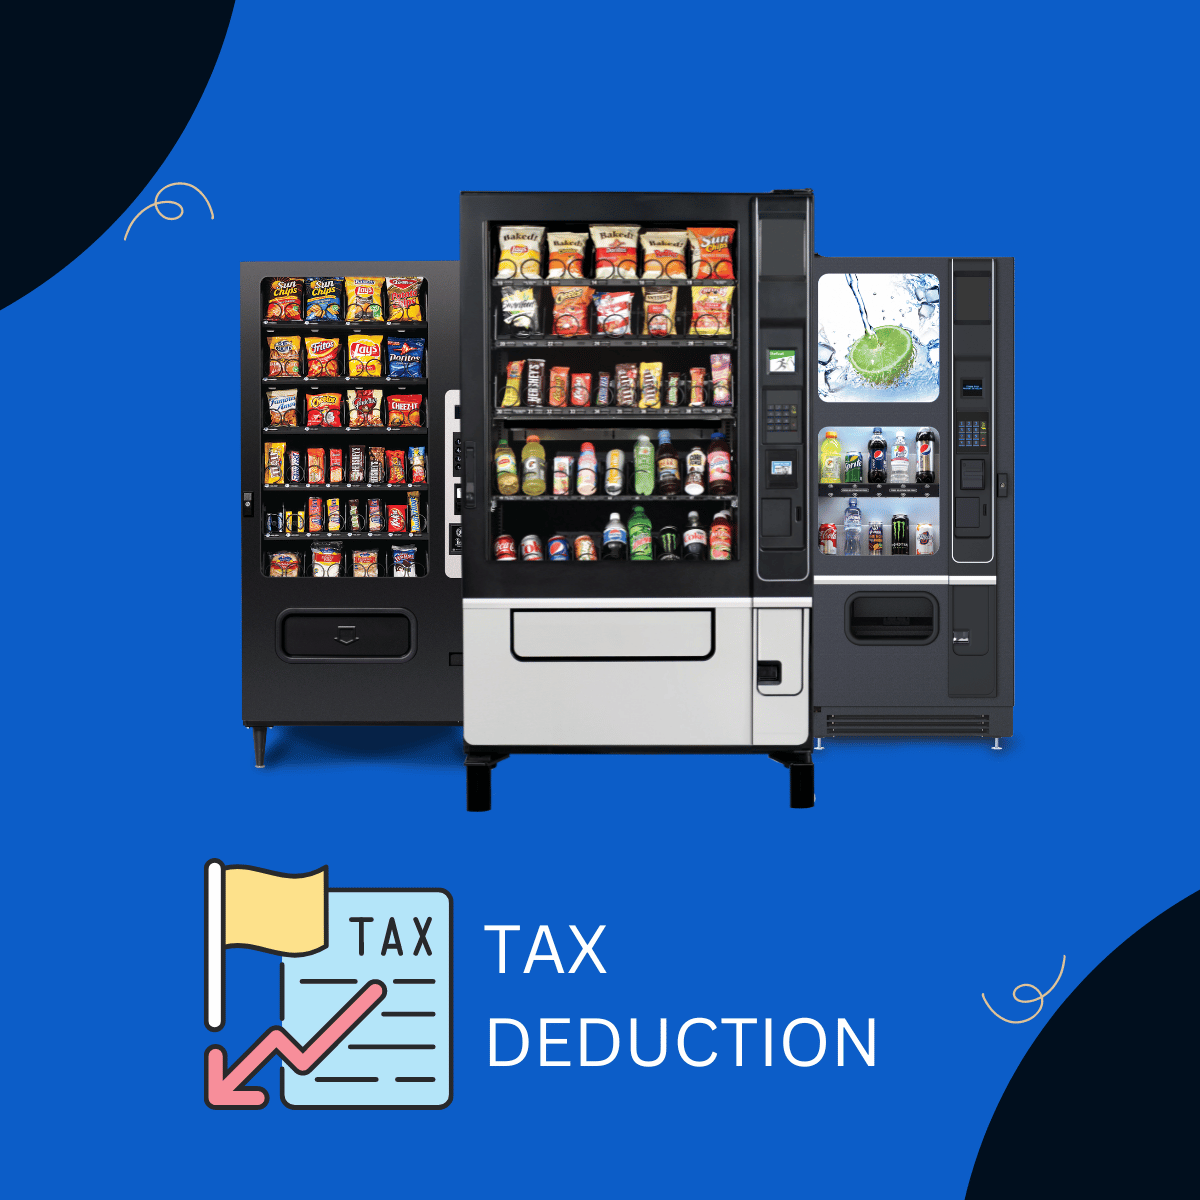 THE 2021 SECTION 179 TAX DEDUCTION